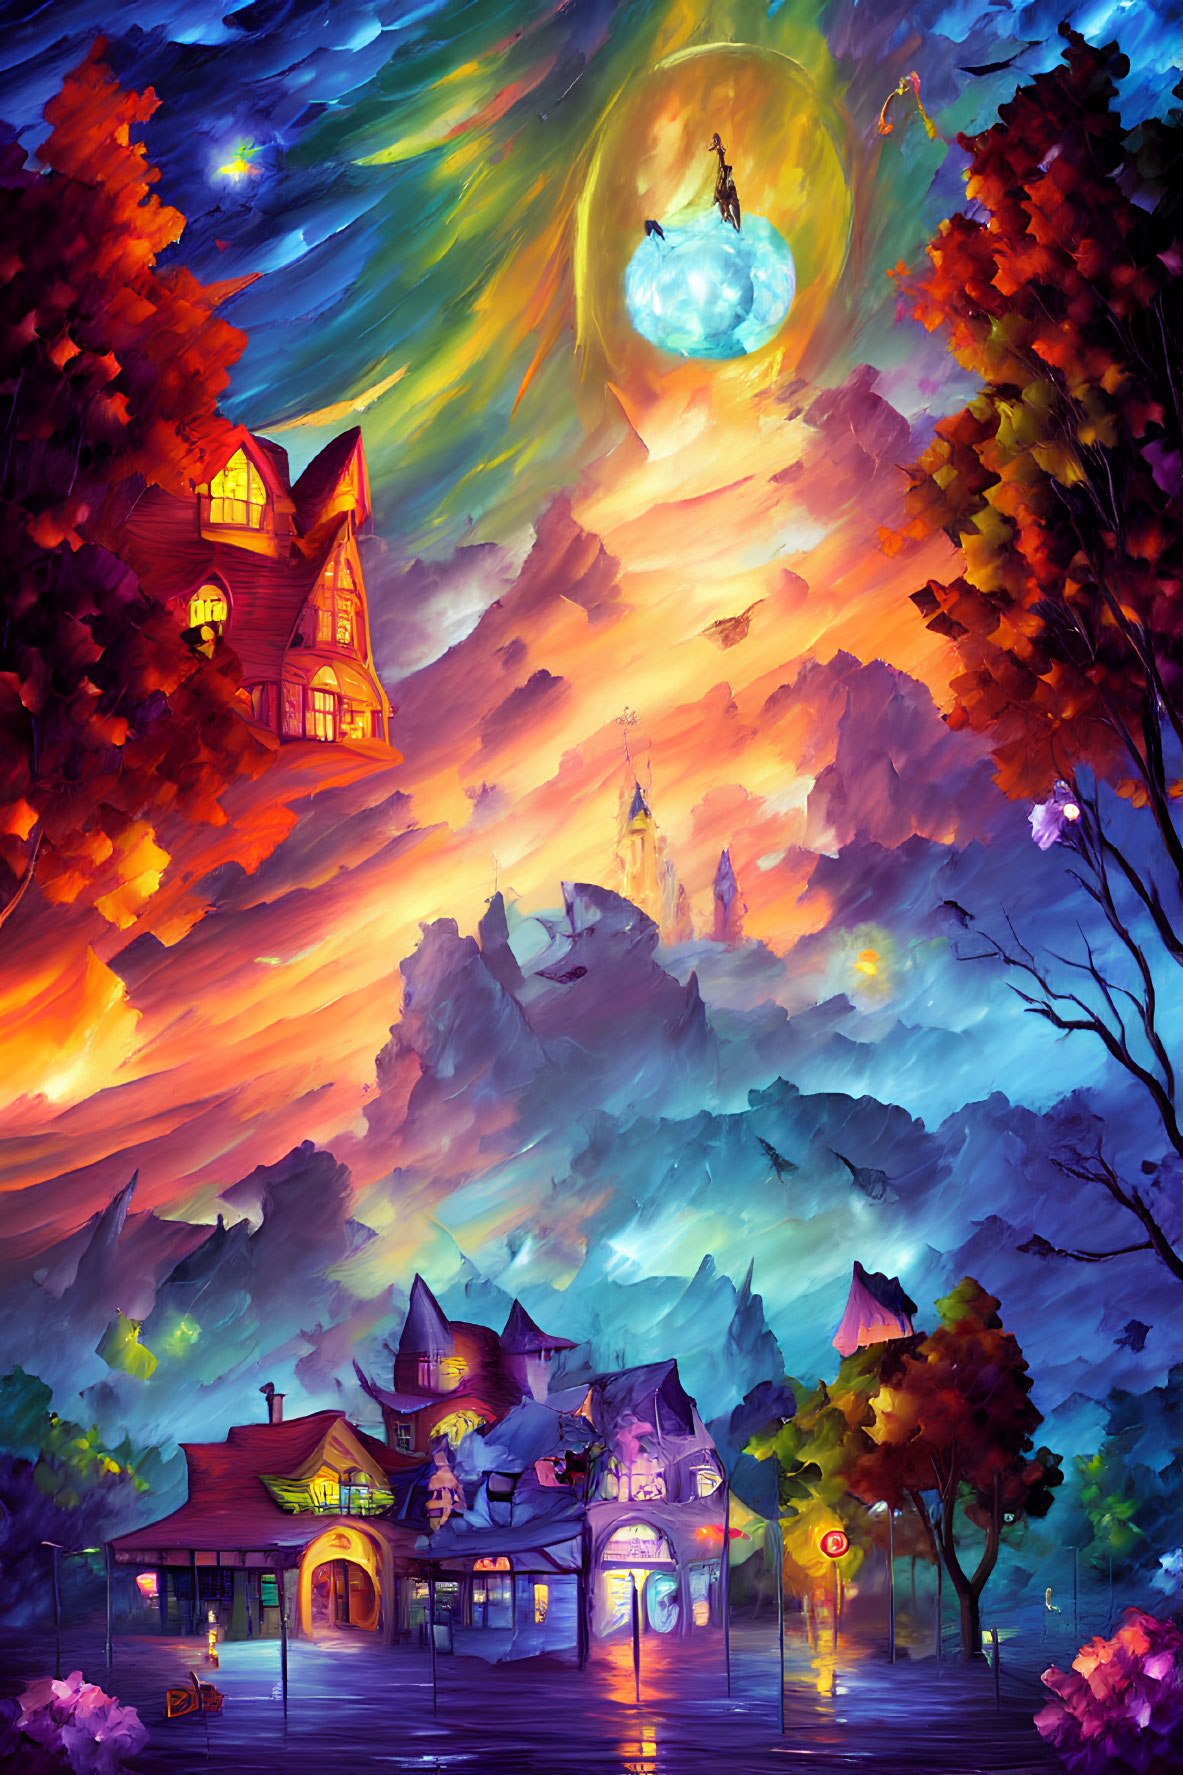 Colorful village painting with luminous moon and magical atmosphere